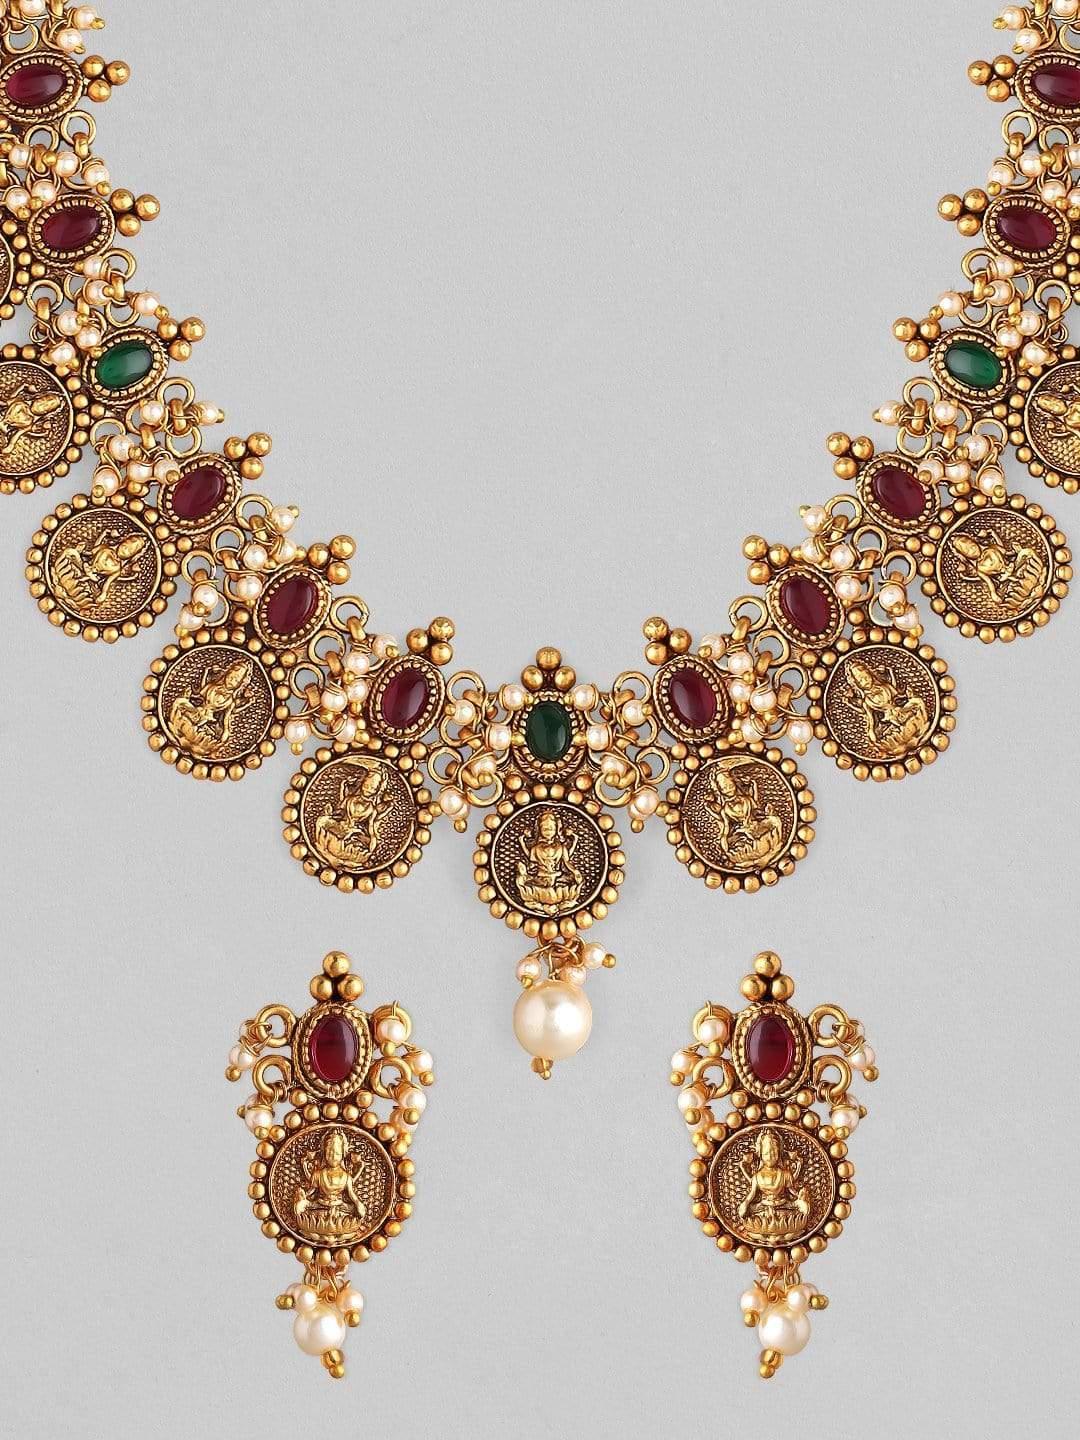 Rubans 24K Gold Plated Filigree Handcrafted Lakshmi Coin Temple Necklace Set - Indiakreations